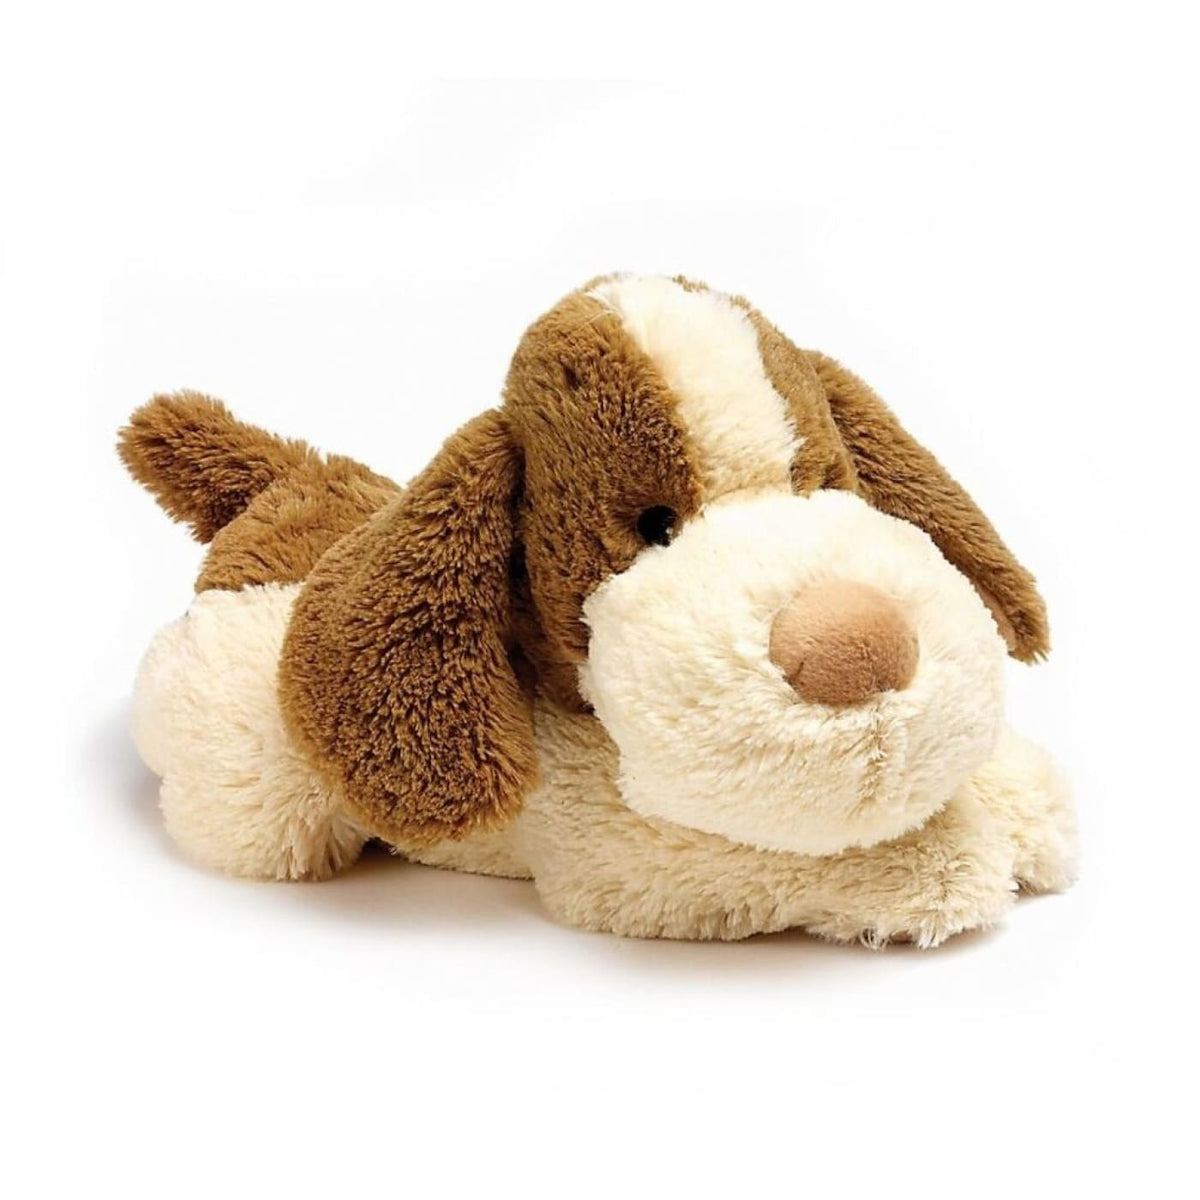 Warmies Cozy Plush - Brown Puppy - Patch Puppy - HEALTH &amp; HOME SAFETY - THERMOMETERS/MEDICINAL